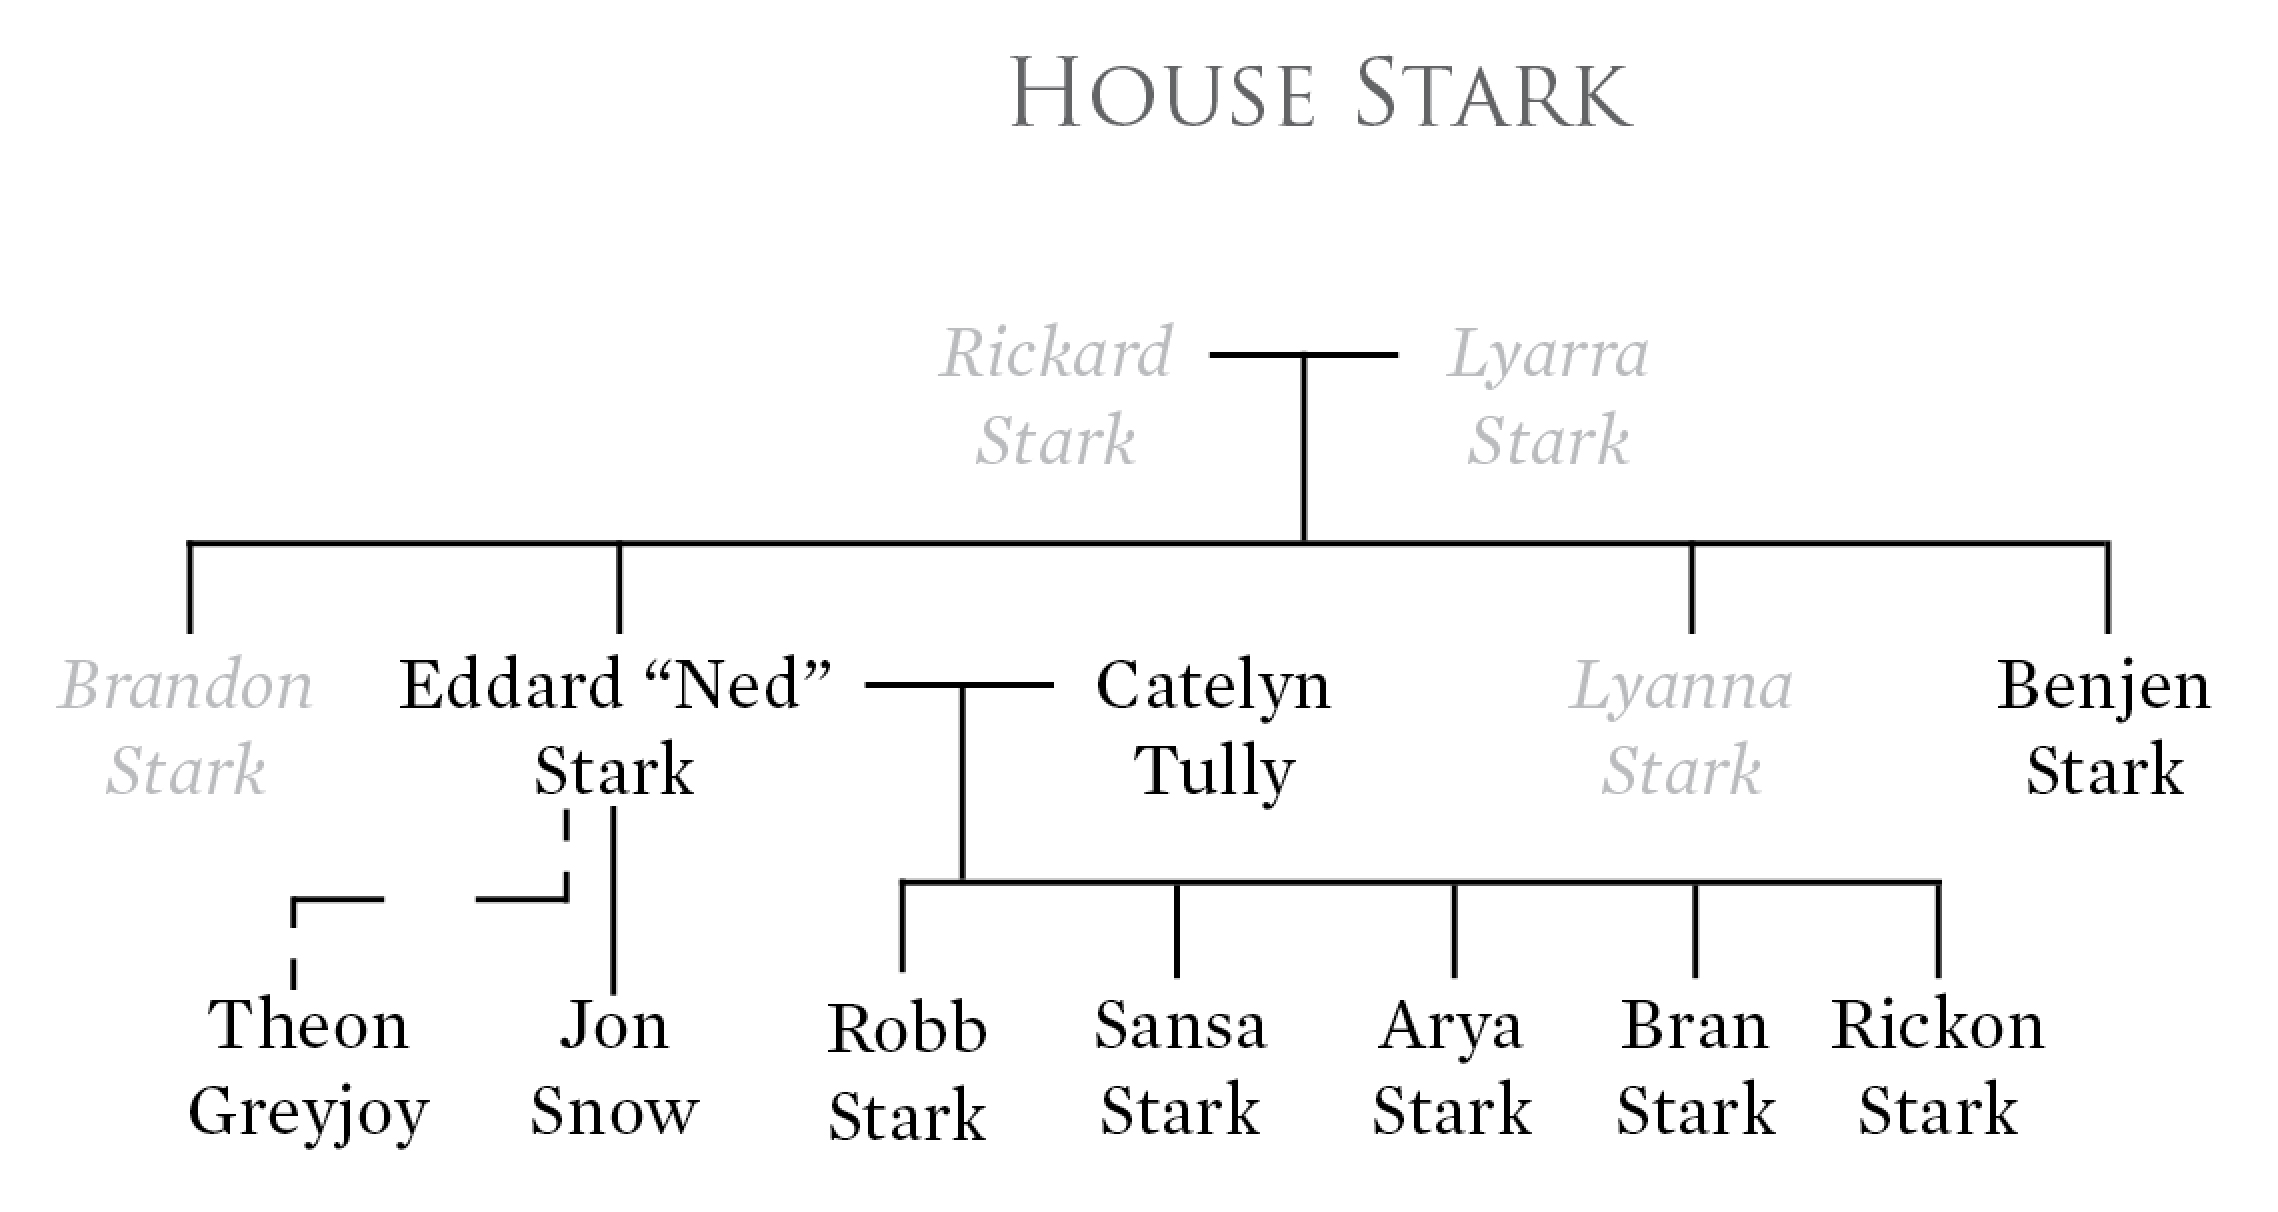 The children of Ned and Catelyn Stark are among the most important characters in the Game of Thrones family tree.